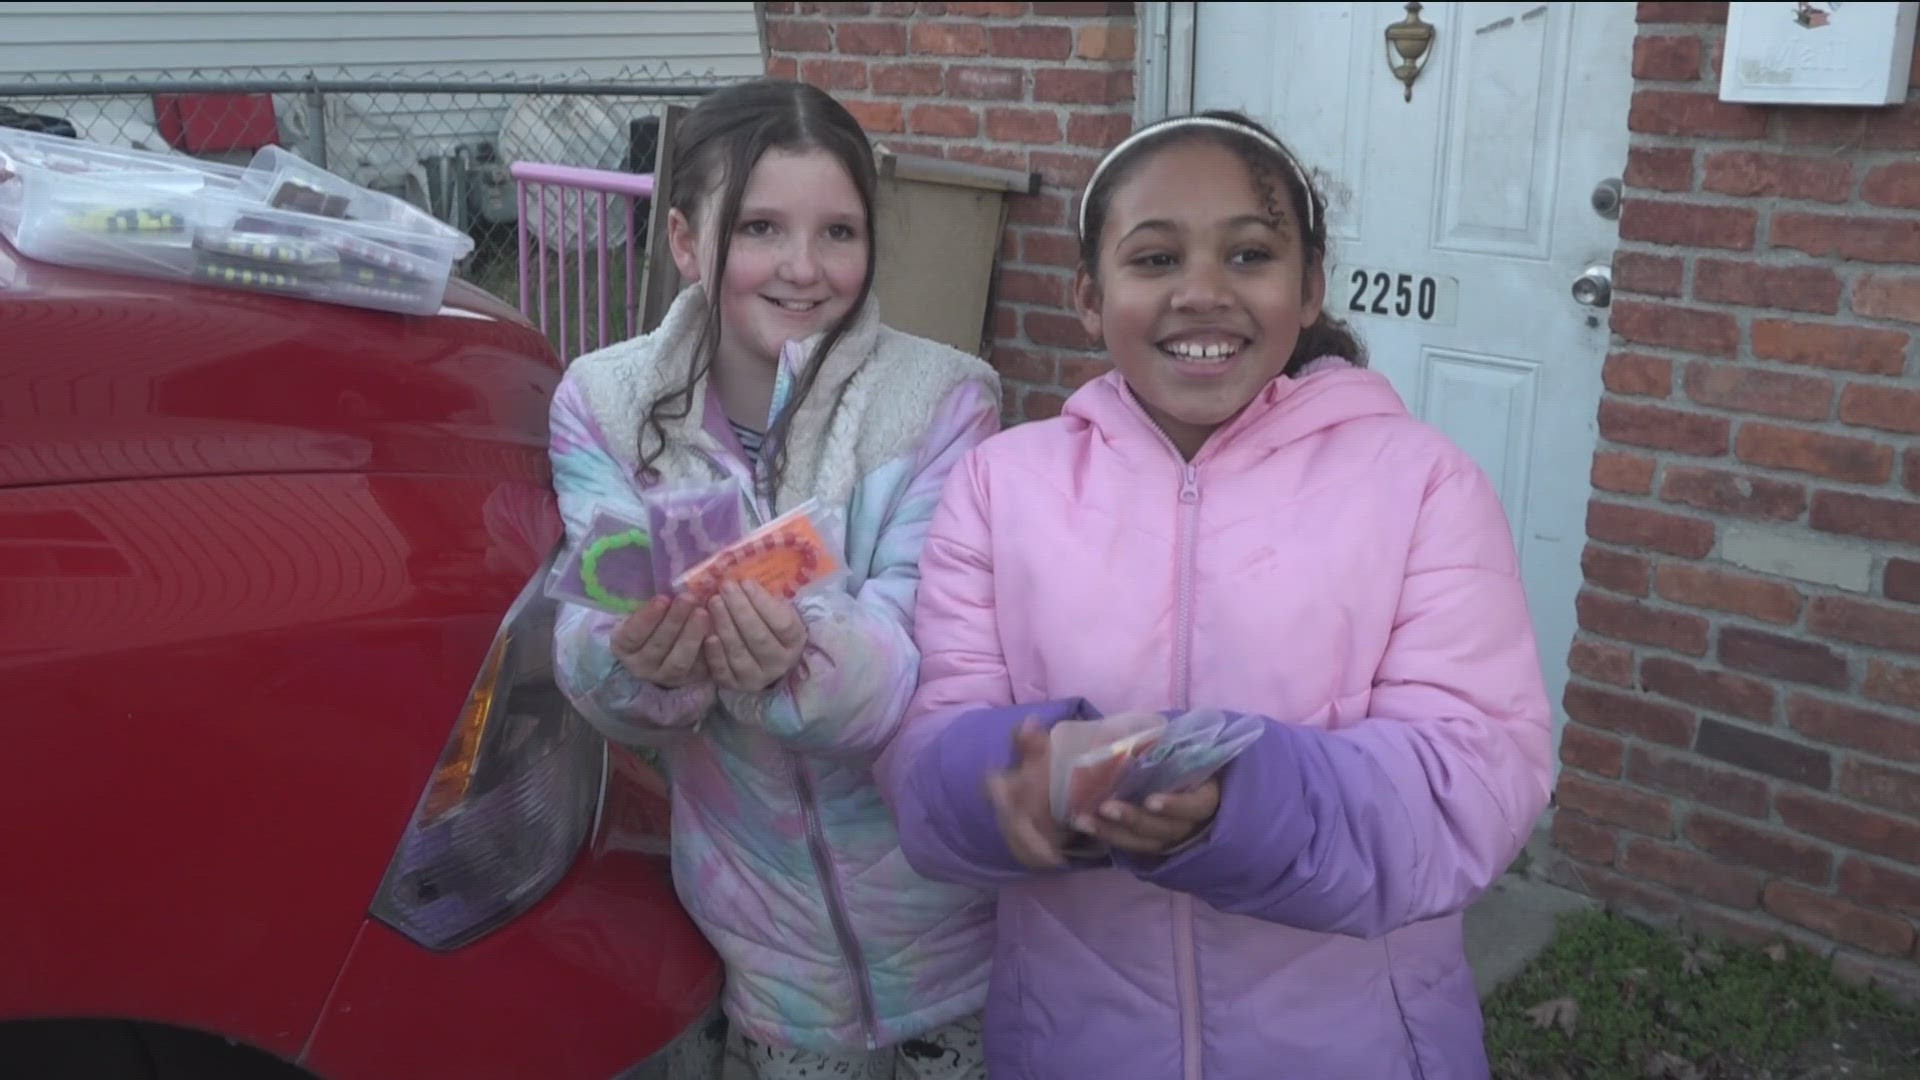 9-year-olds making bracelets to help feed homeless community